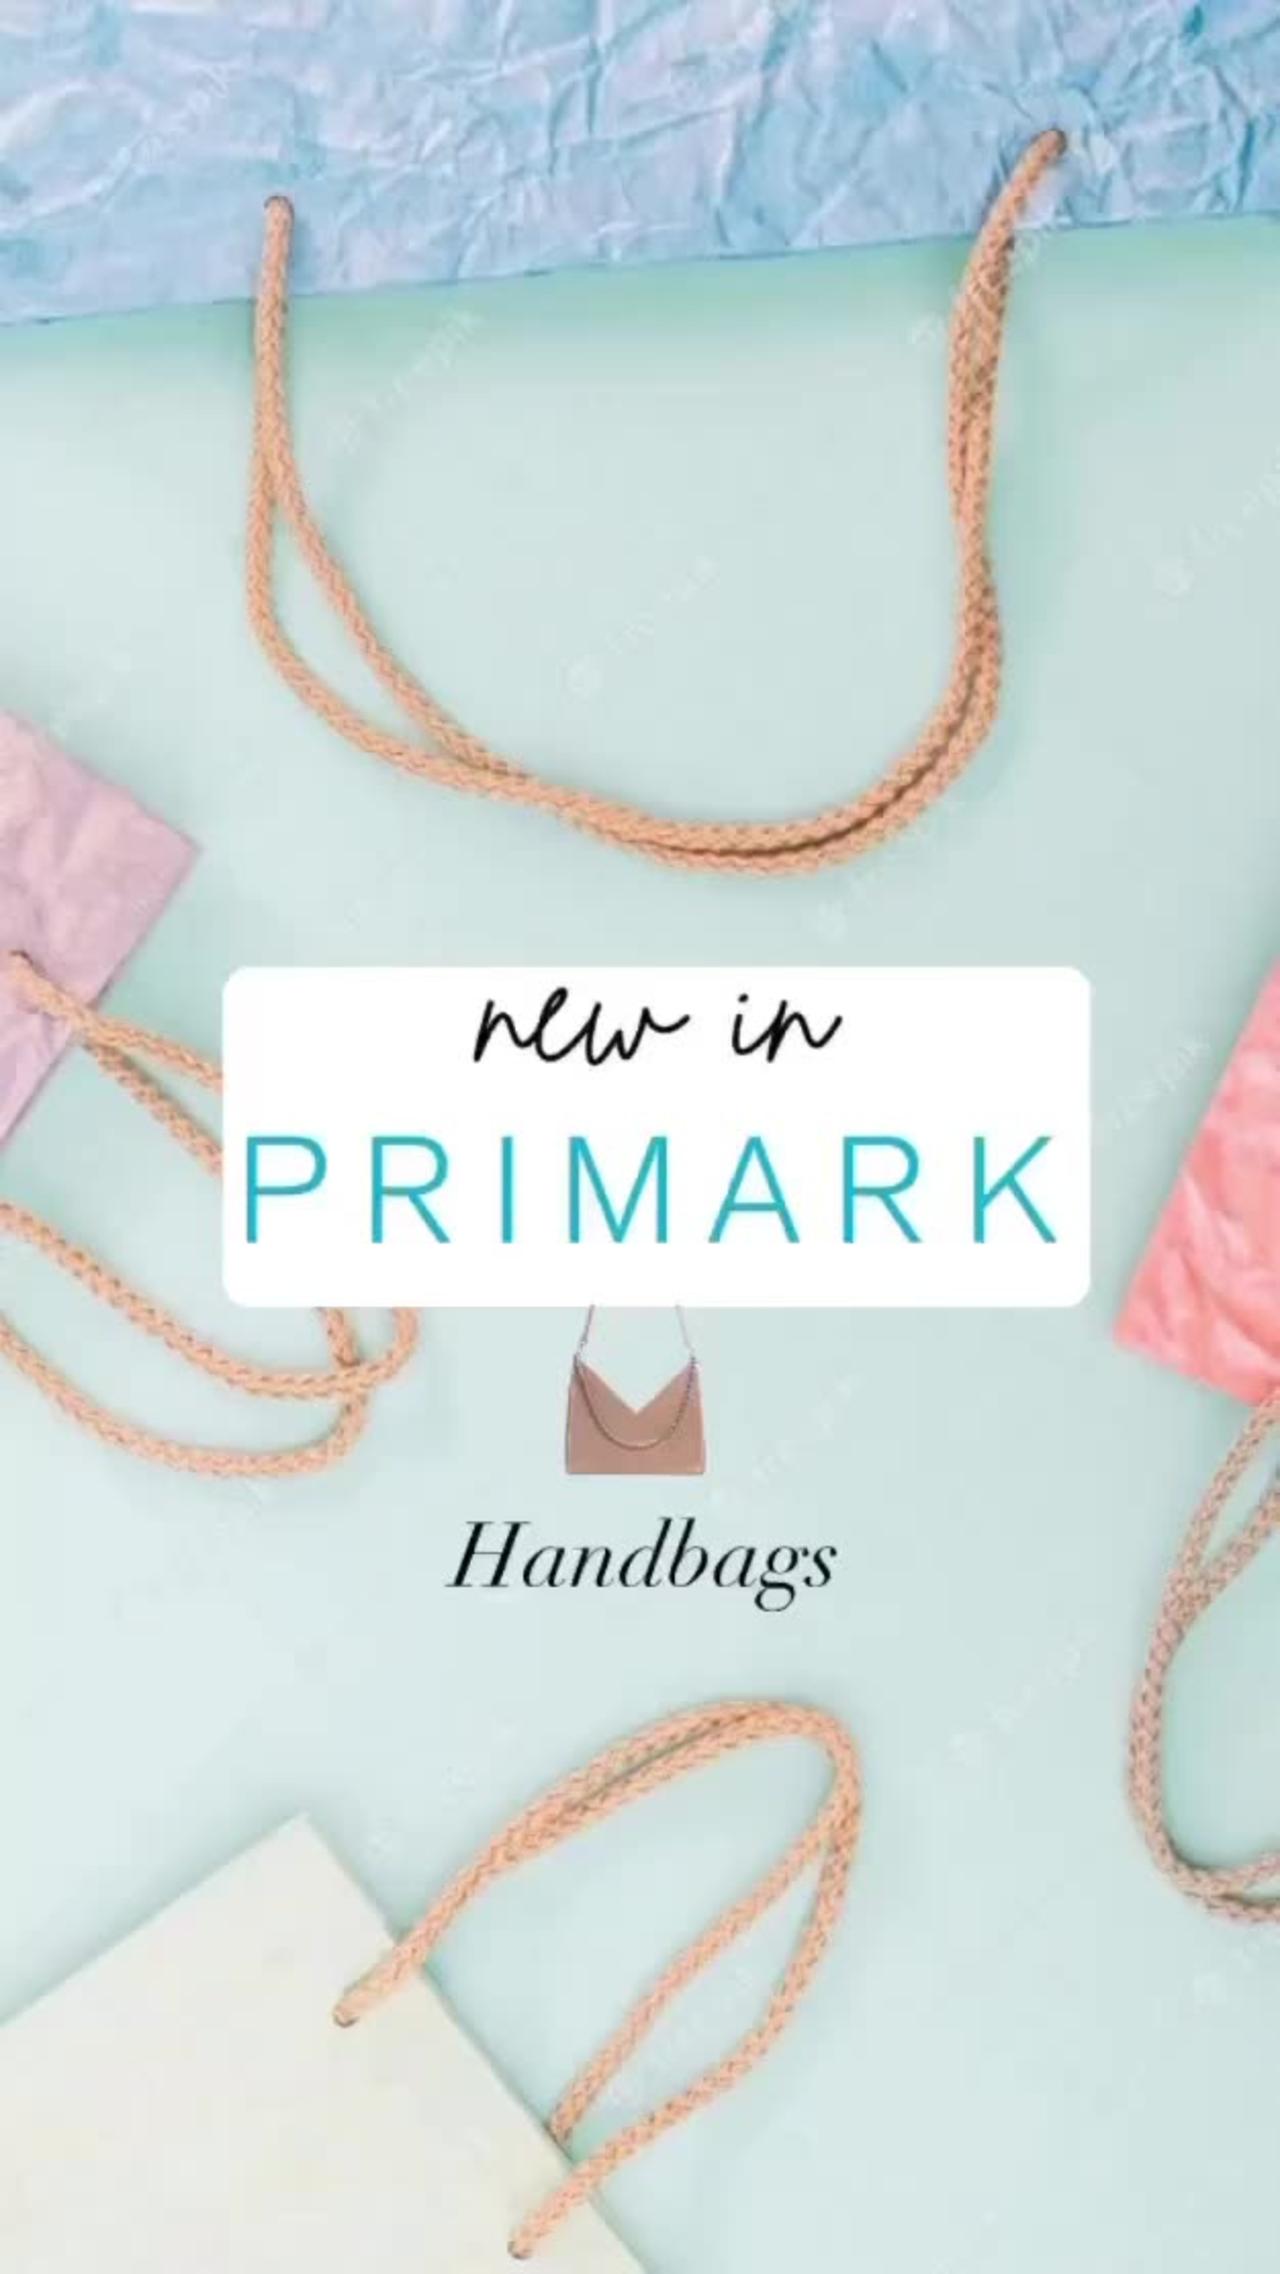 Whats new in Primark??